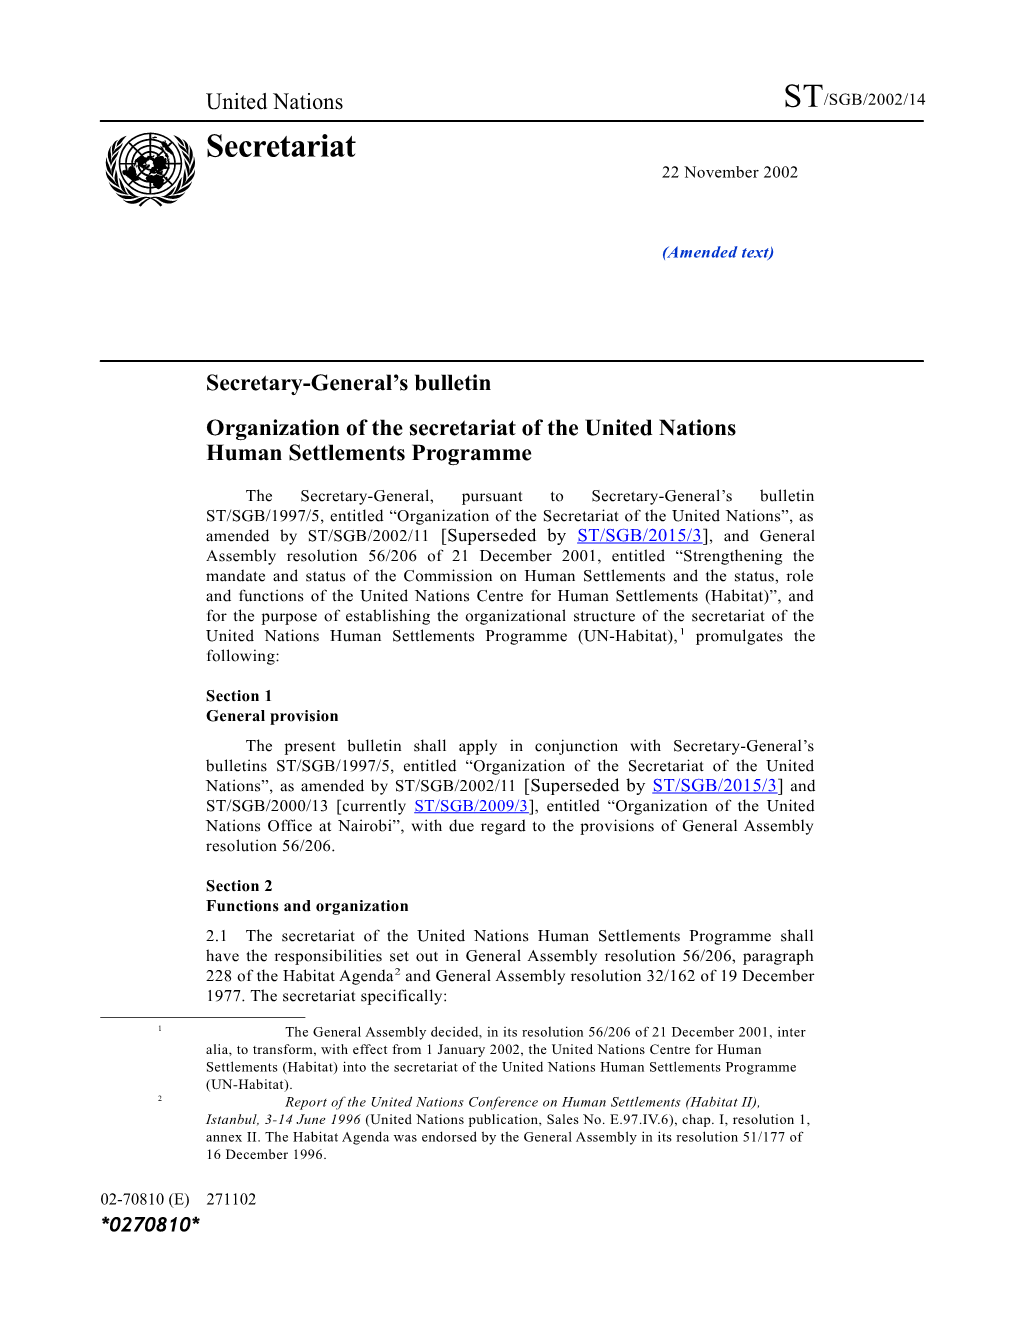 Organization of the Secretariat of the United Nations Human Settlements Programme